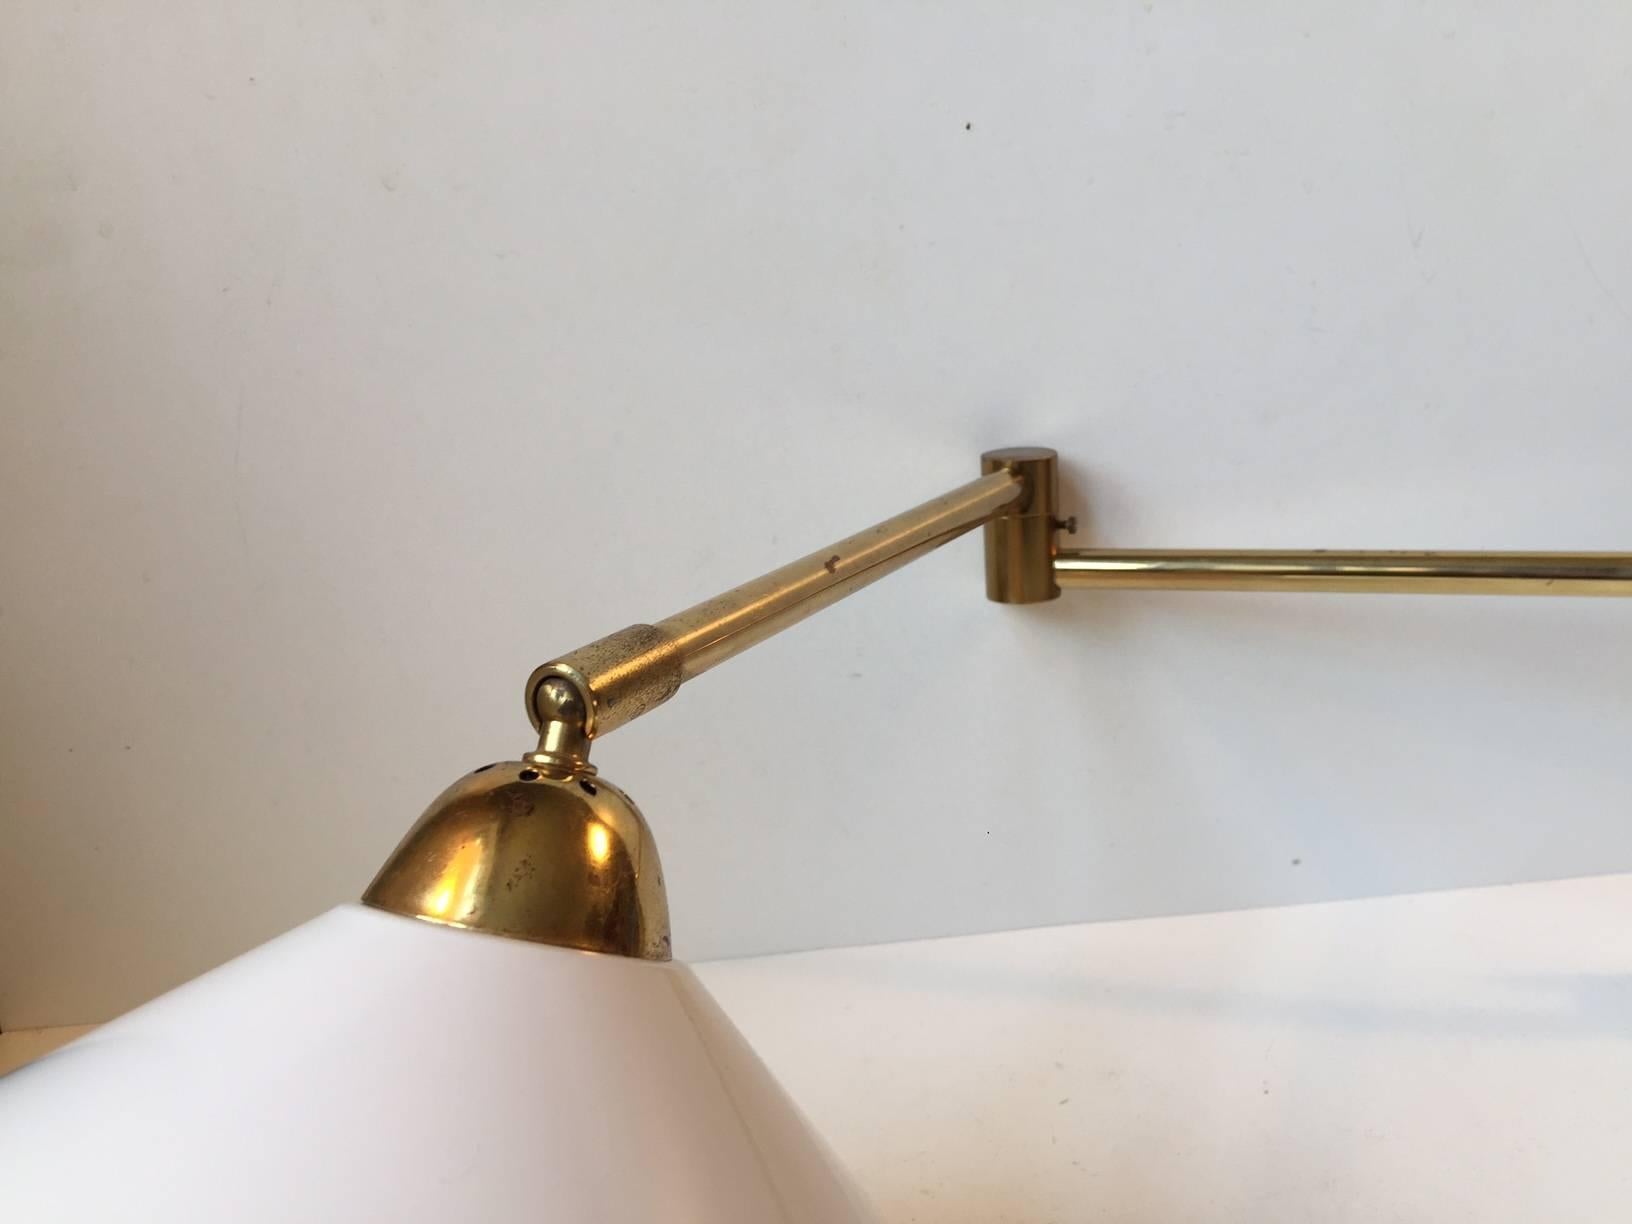 Swing-arm brass wall light with articulated joints and large white conical shade. Designed by Bent Nordsted and manufactured by Lyskjær Belysning in Denmark during the 1960s. The total reach of the light is 70 cm (28 inches, approximate). Maker mark